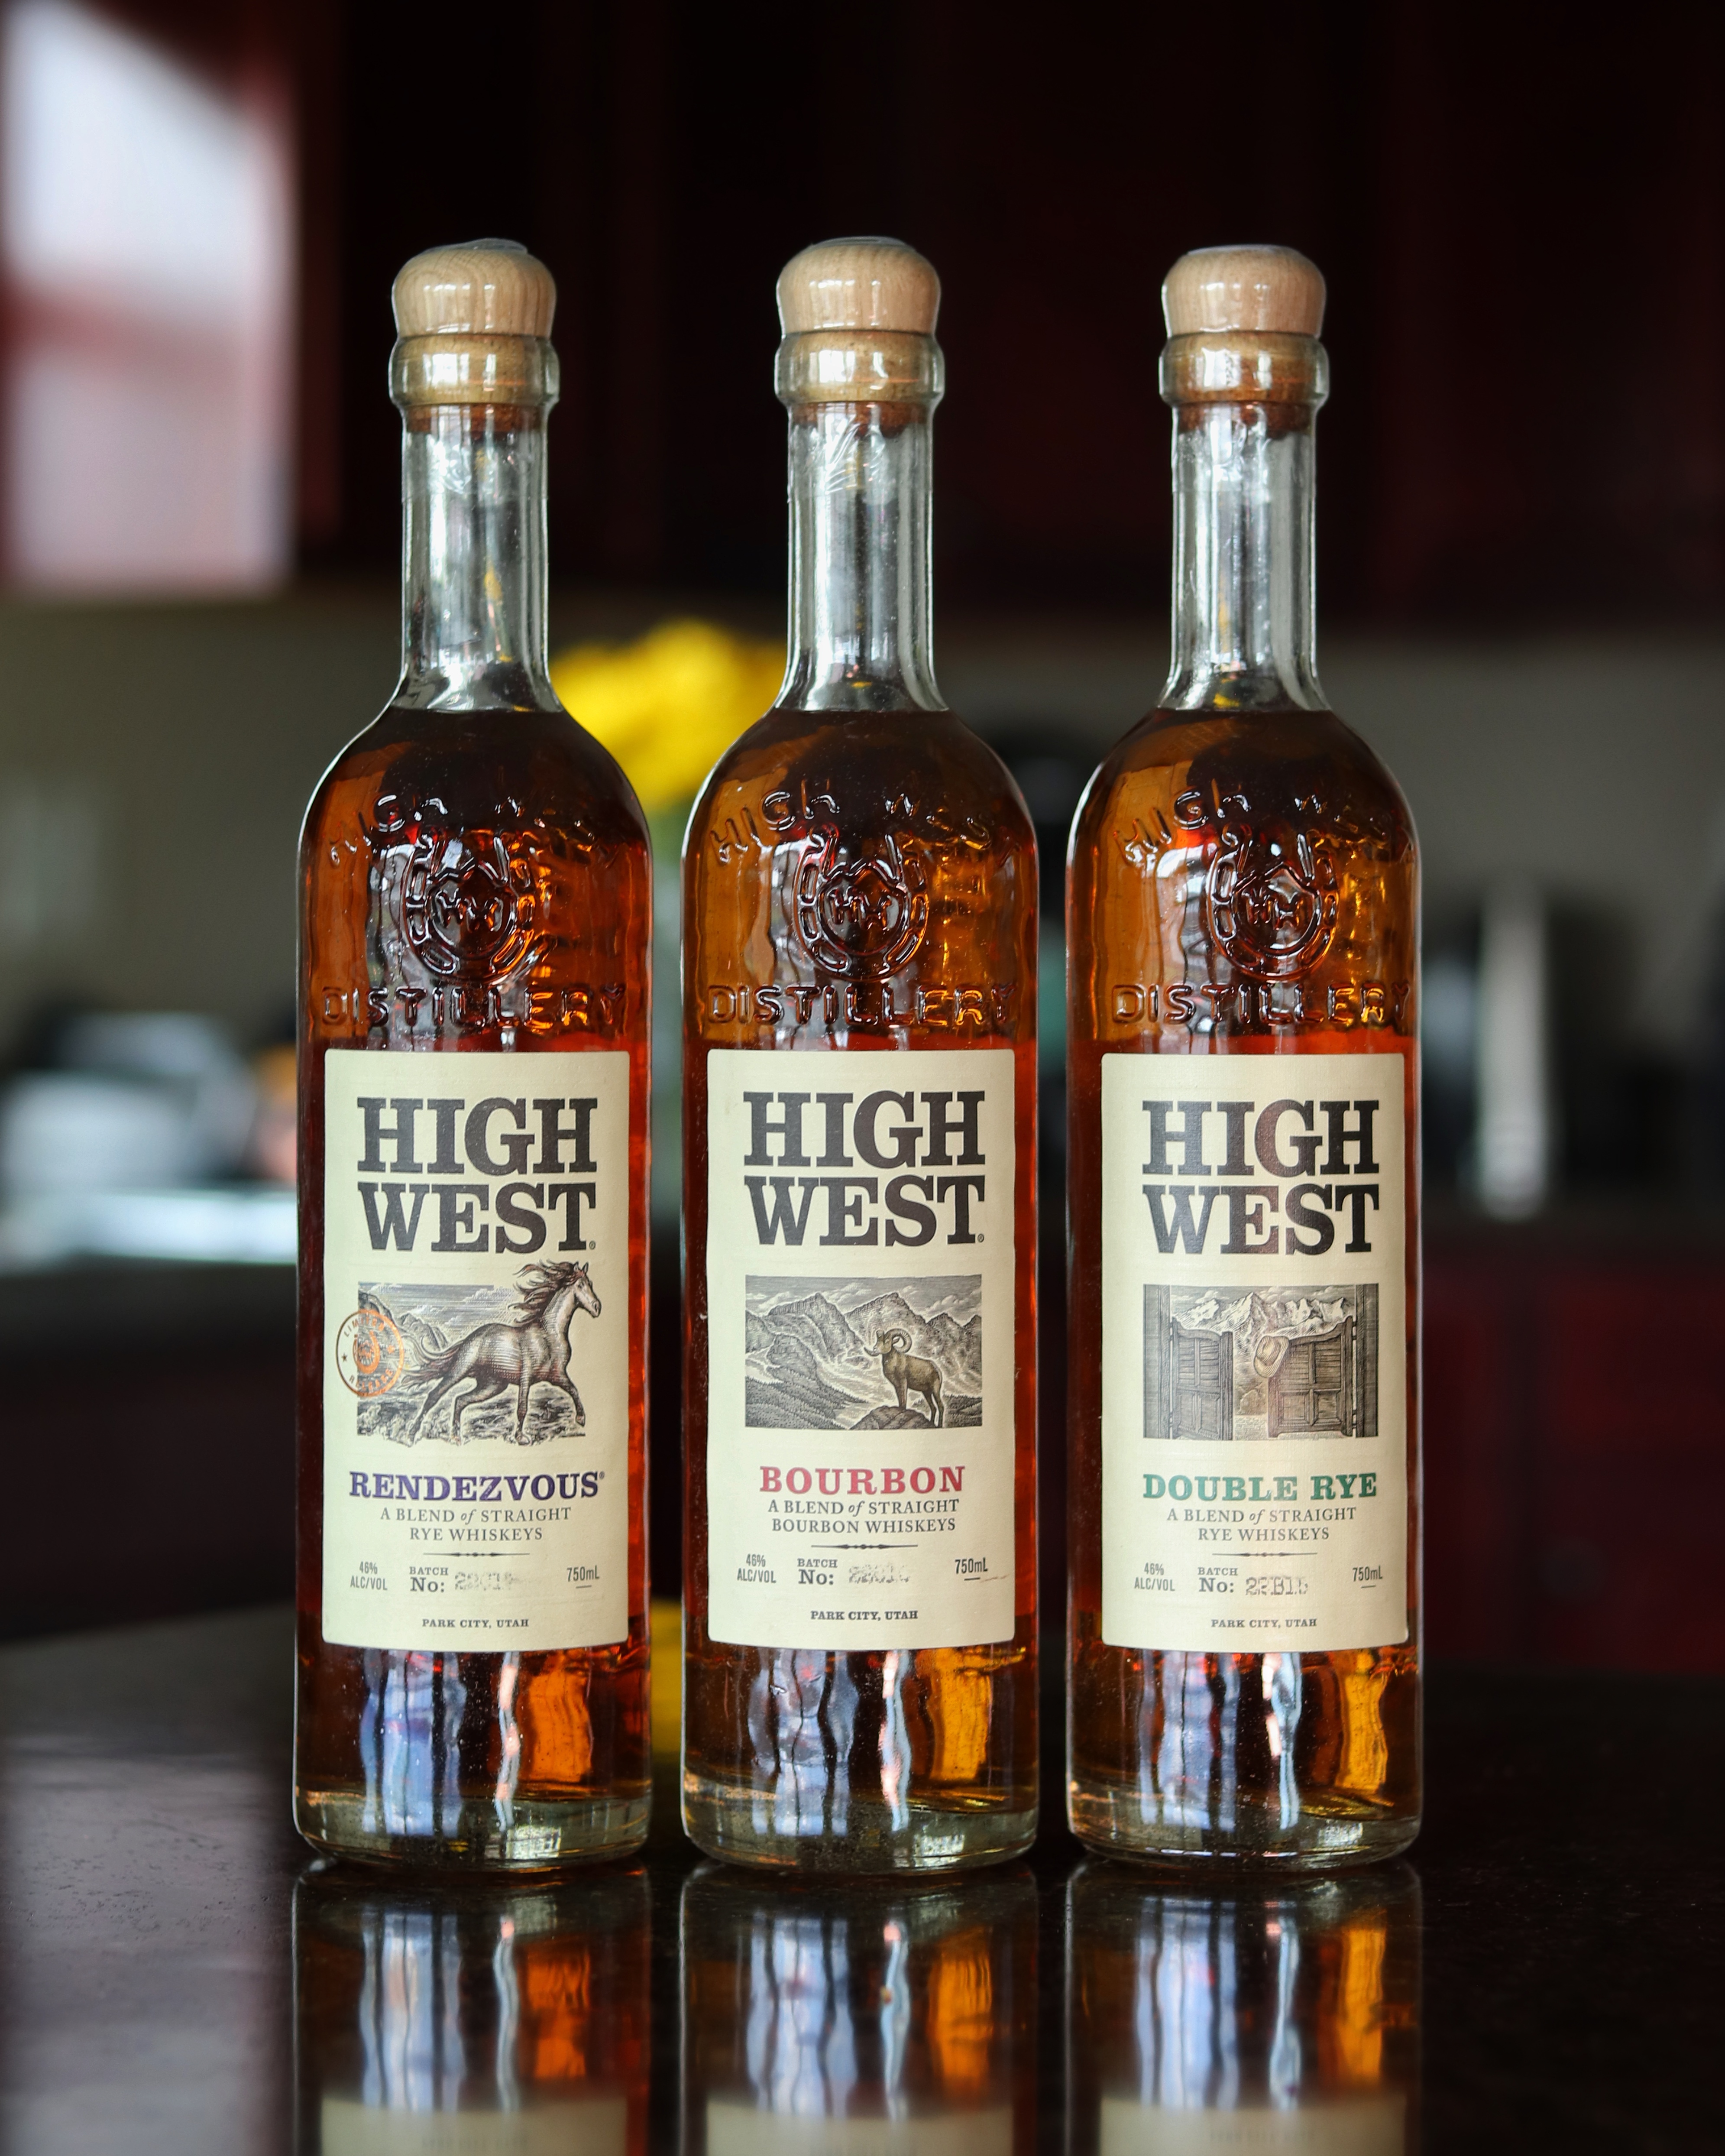 188: High West Distillery Discusses Their Whiskey Lineup